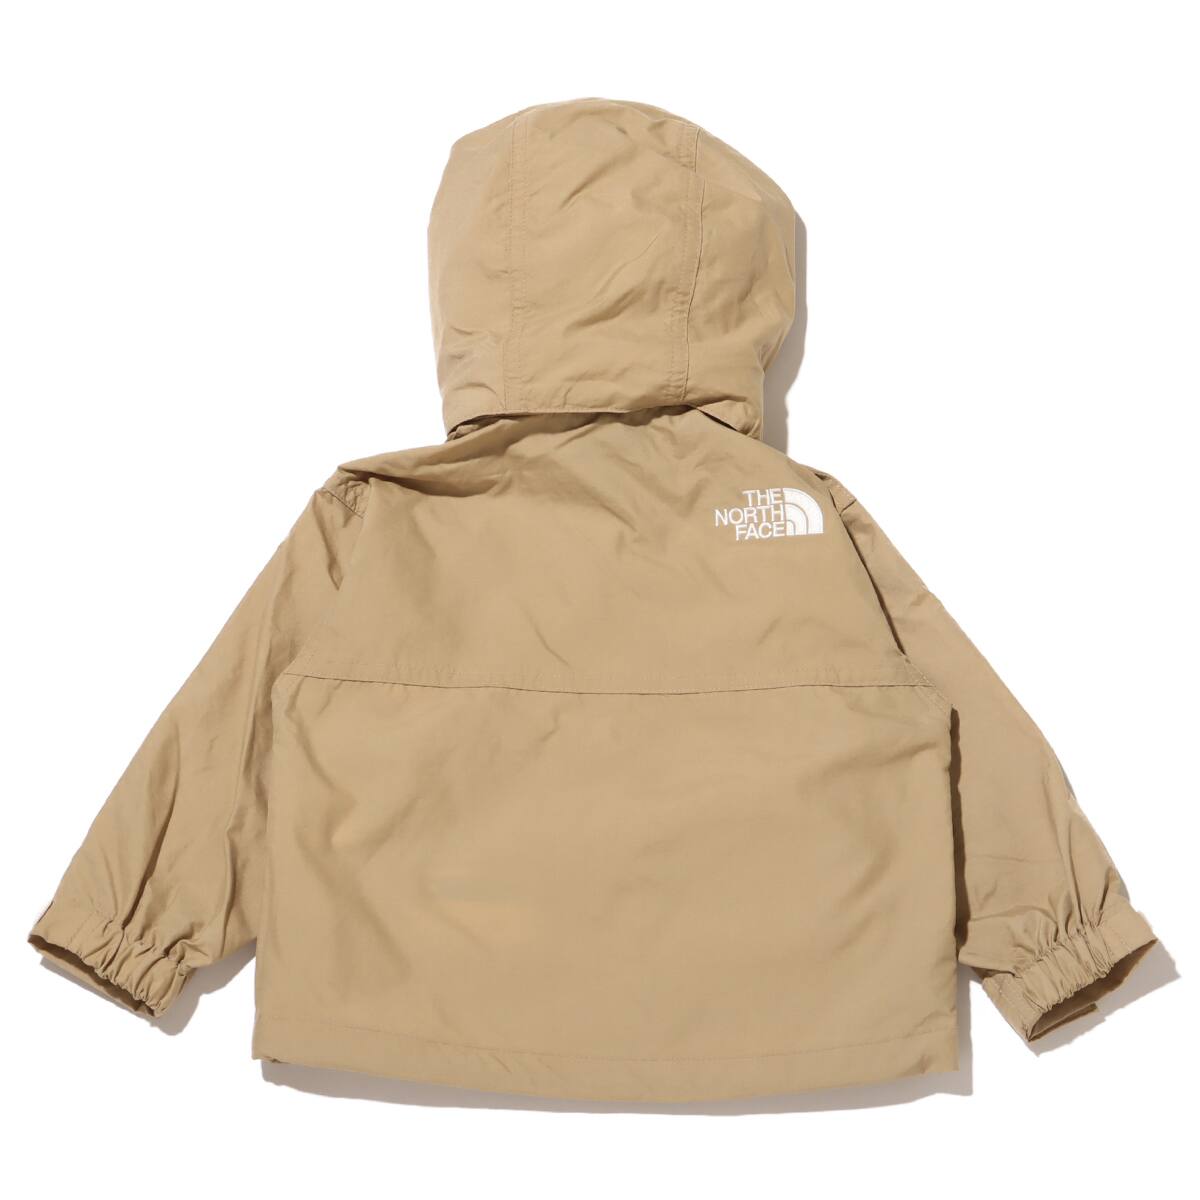 THE NORTH FACE Baby Compact Jacket ケルプタン 24SS-I